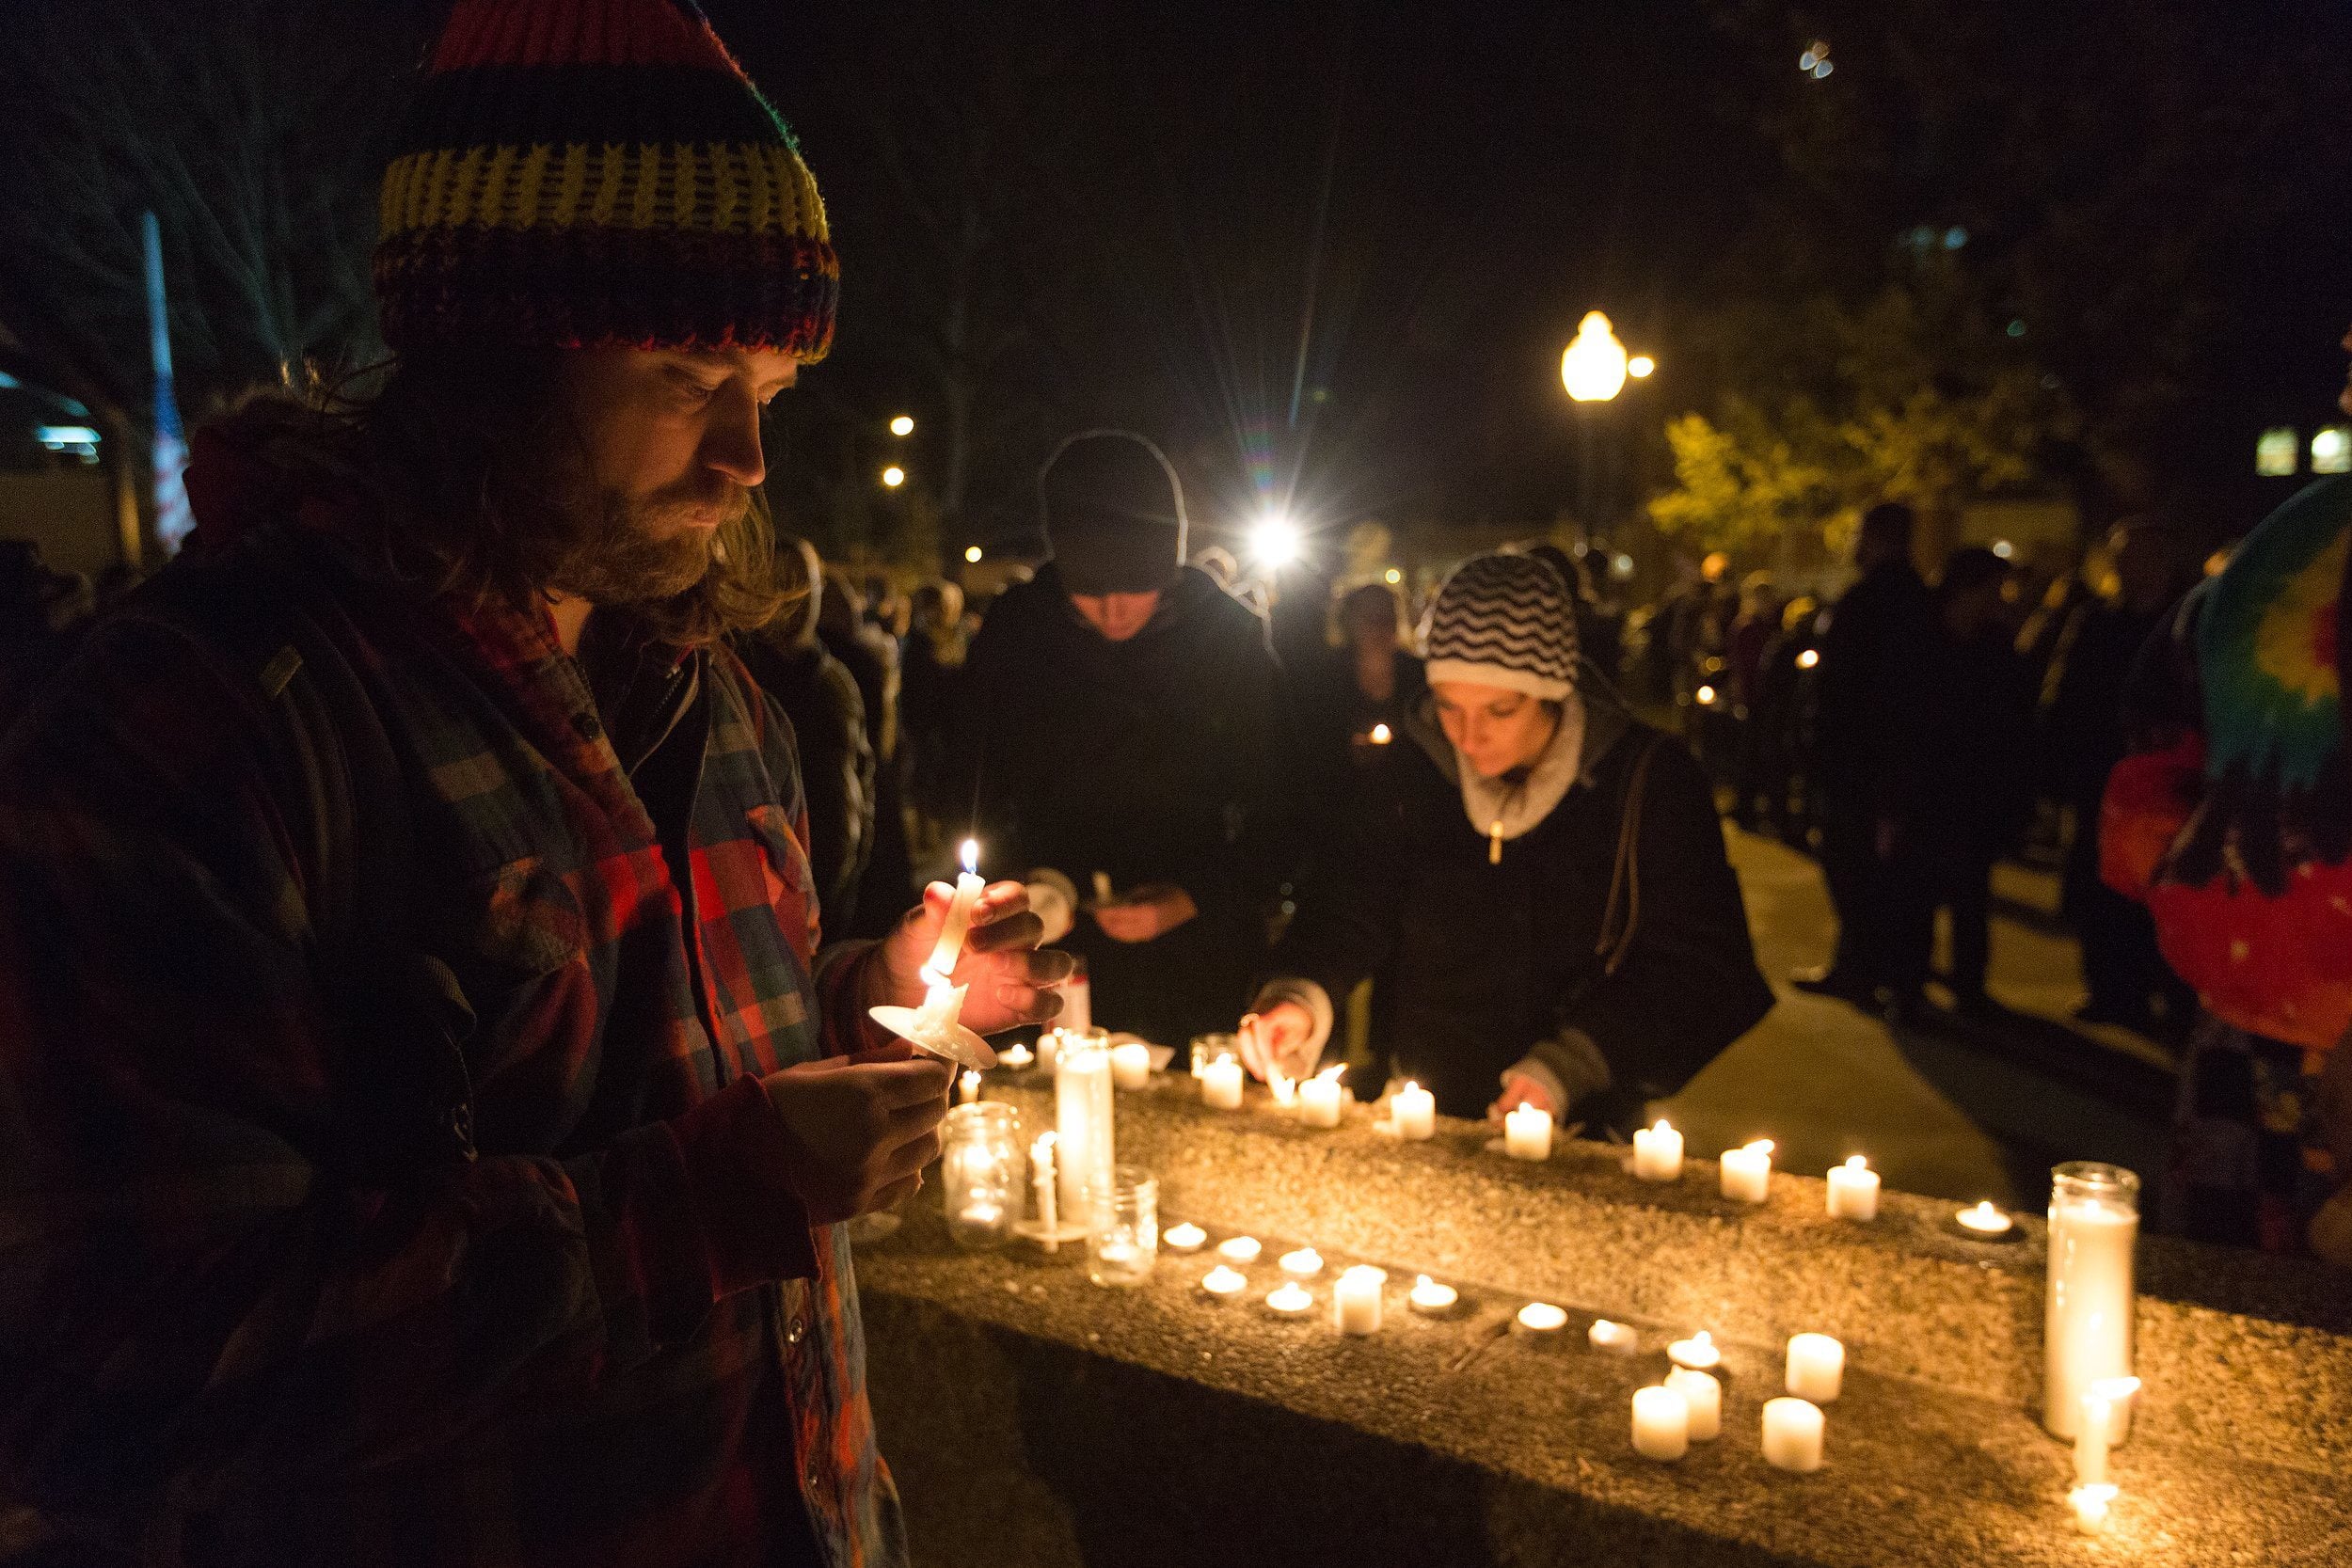 Joe Lucido lights a candle during the candlelight vigil at Bronson Park in remembrance of the mass shooting victims on Monday, Feb. 22, 2016, in Kalamazoo, Mich.